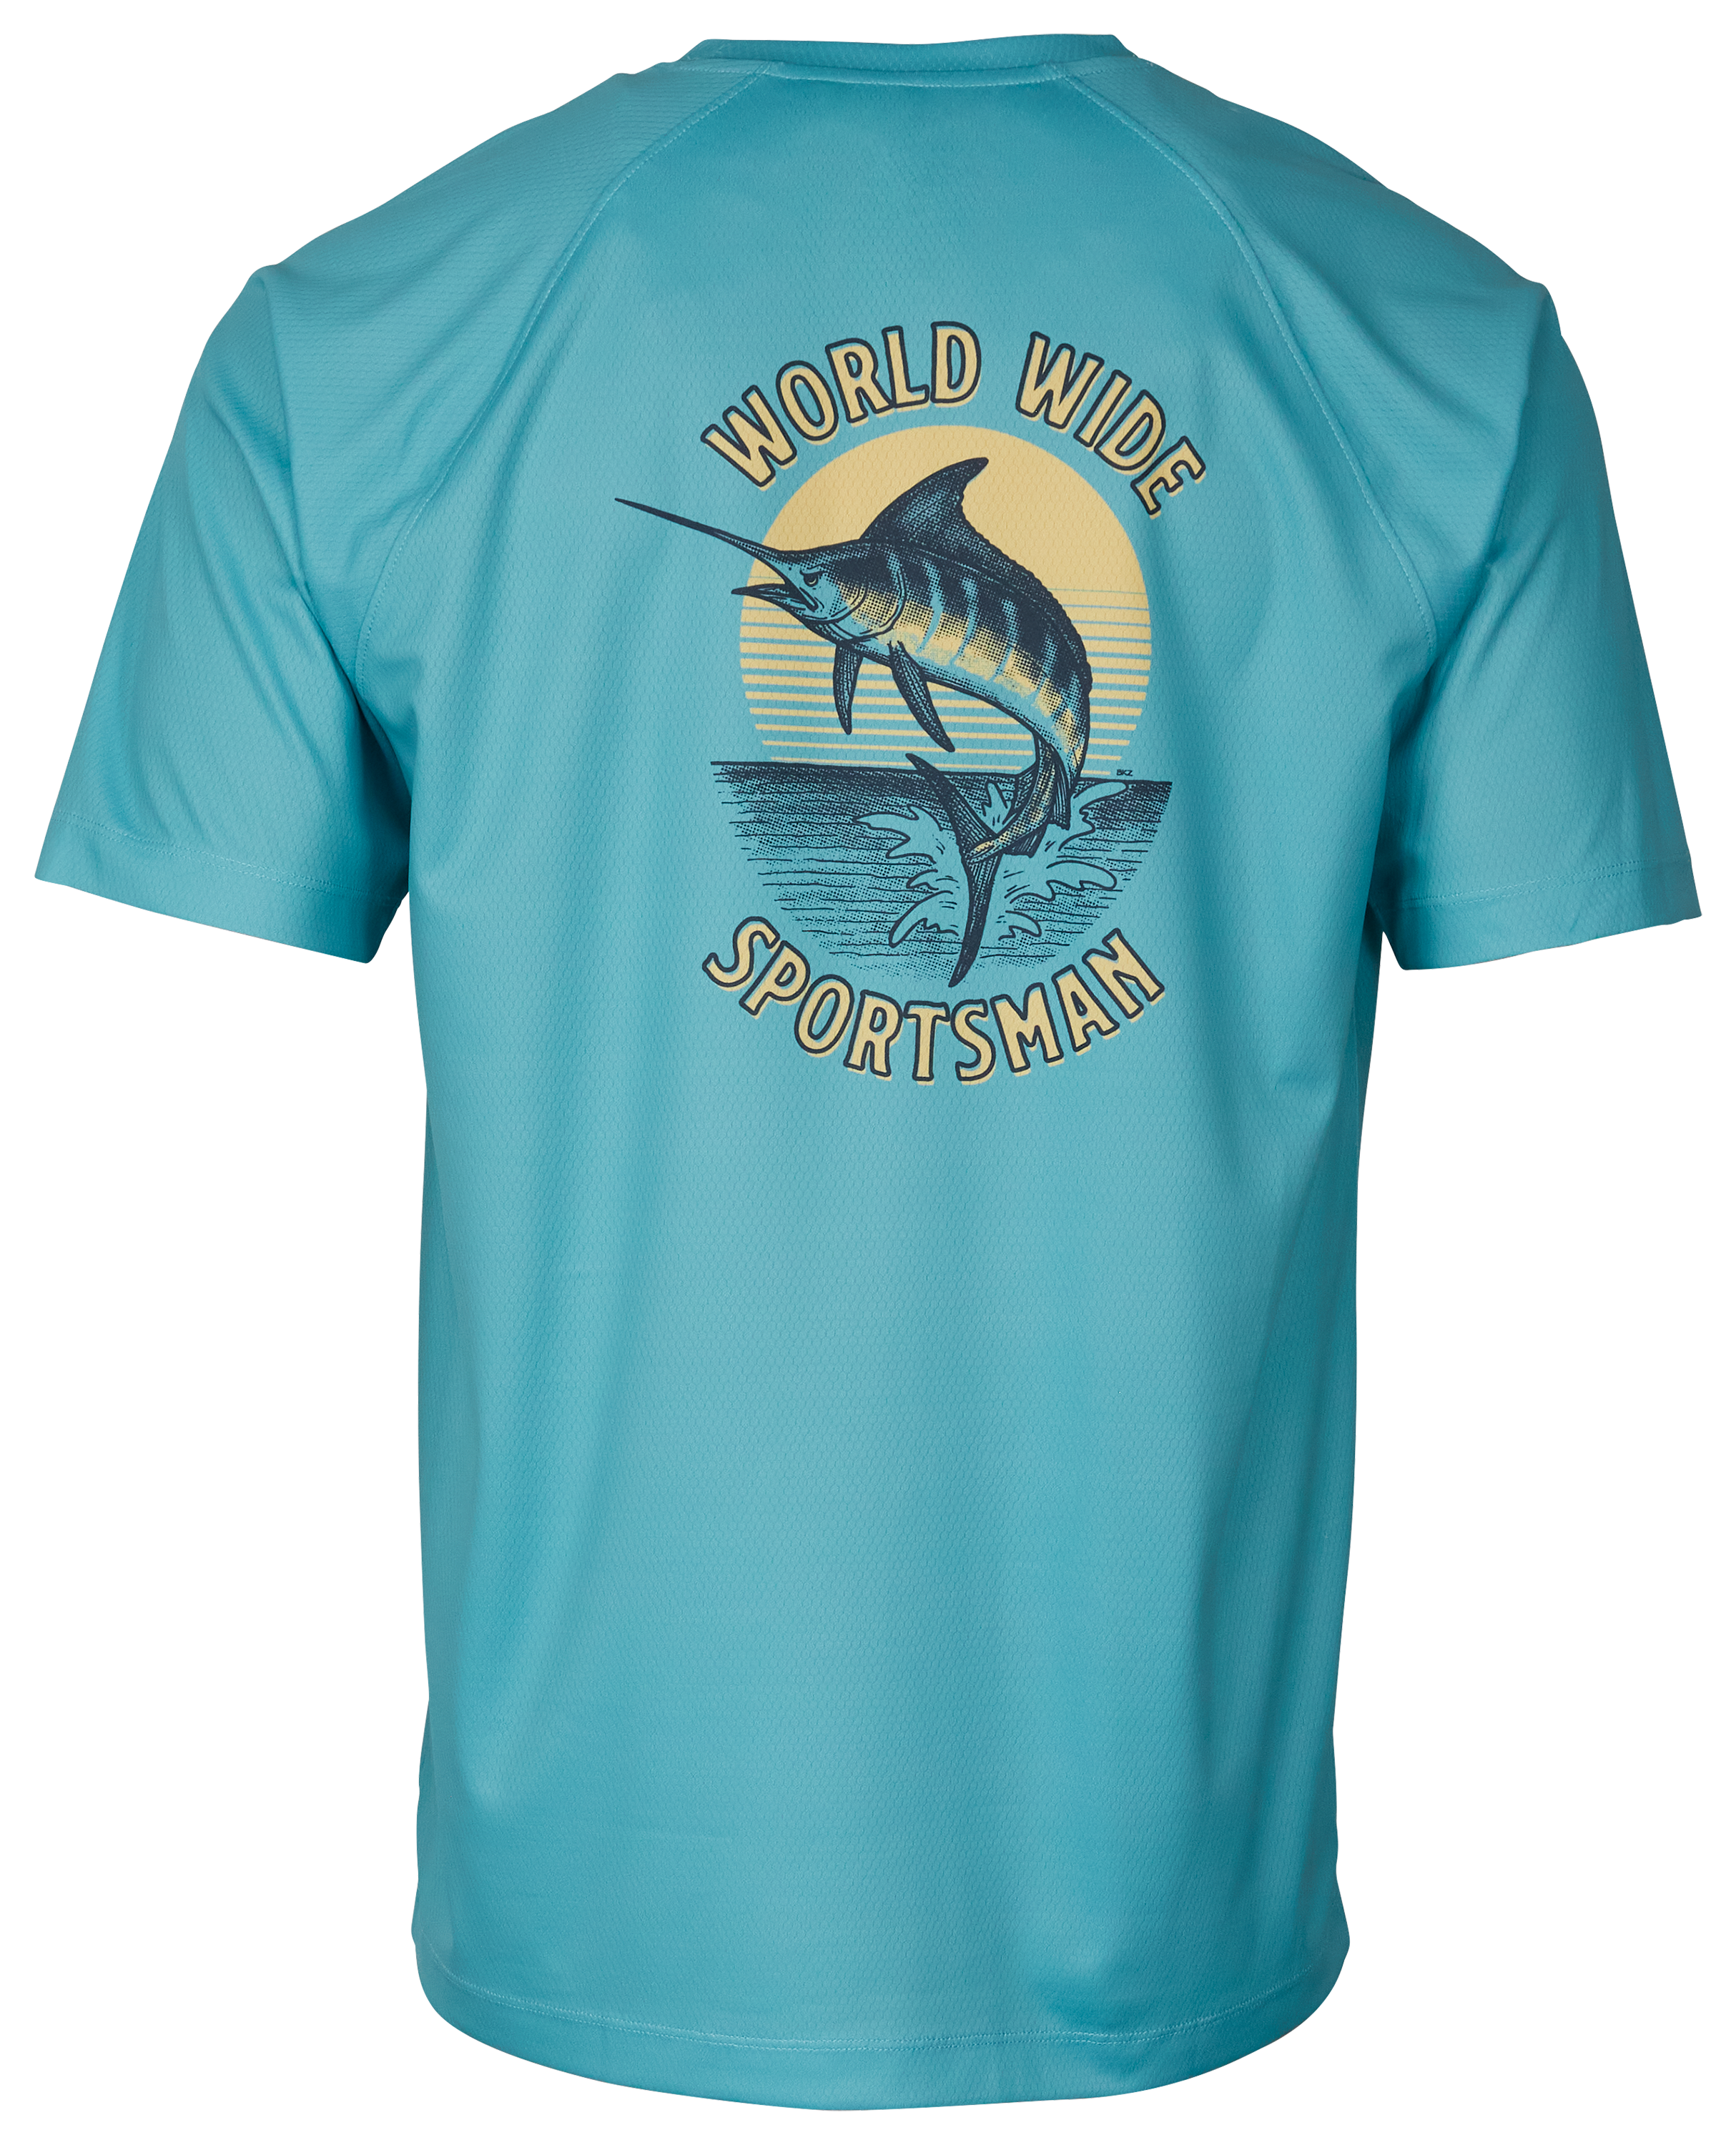 World Wide Sportsman Swordfish Sublimated Graphic Short-Sleeve T-Shirt For Men - Reef Waters - 2XL